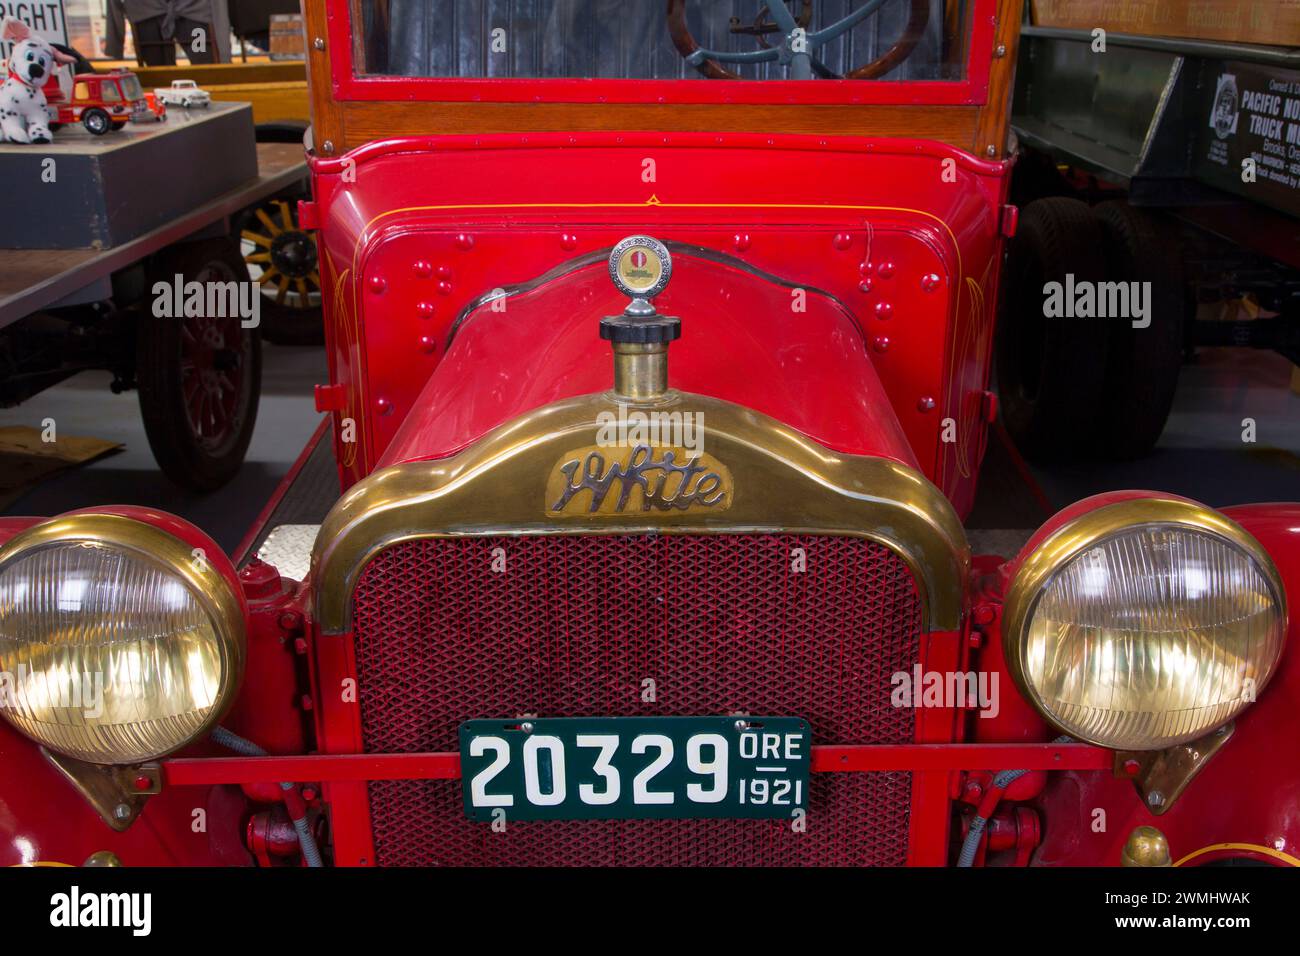 1921 White Motor Truck in Truck Museum, Great Oregon Steam-Up, Antique Powerland, Brooks, Oregon Stock Photo